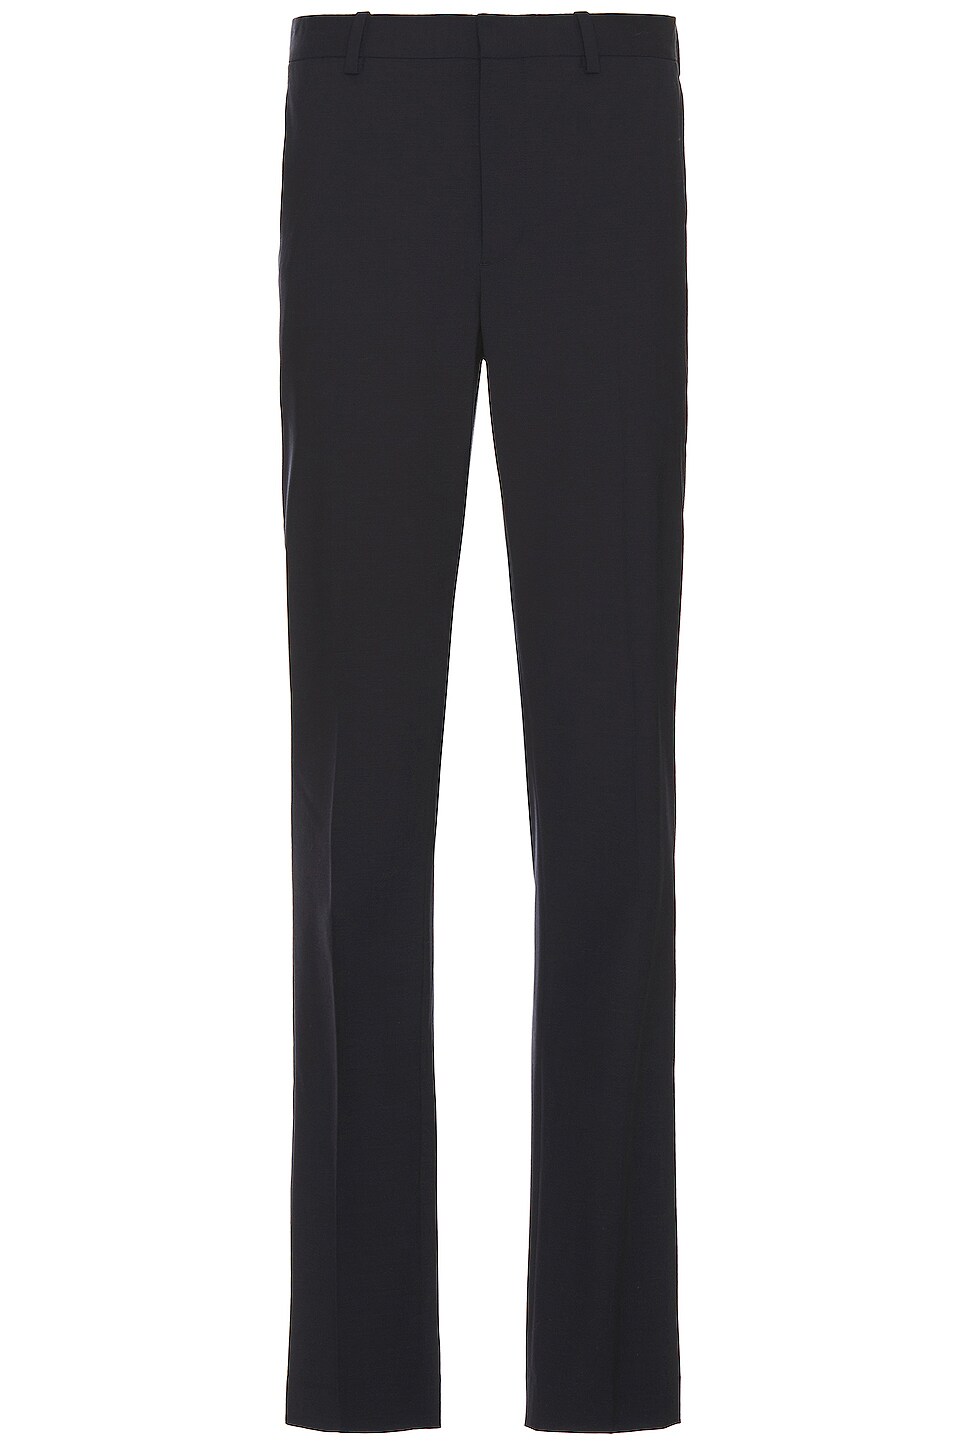 Image 1 of Theory Mayer Pant in Navy